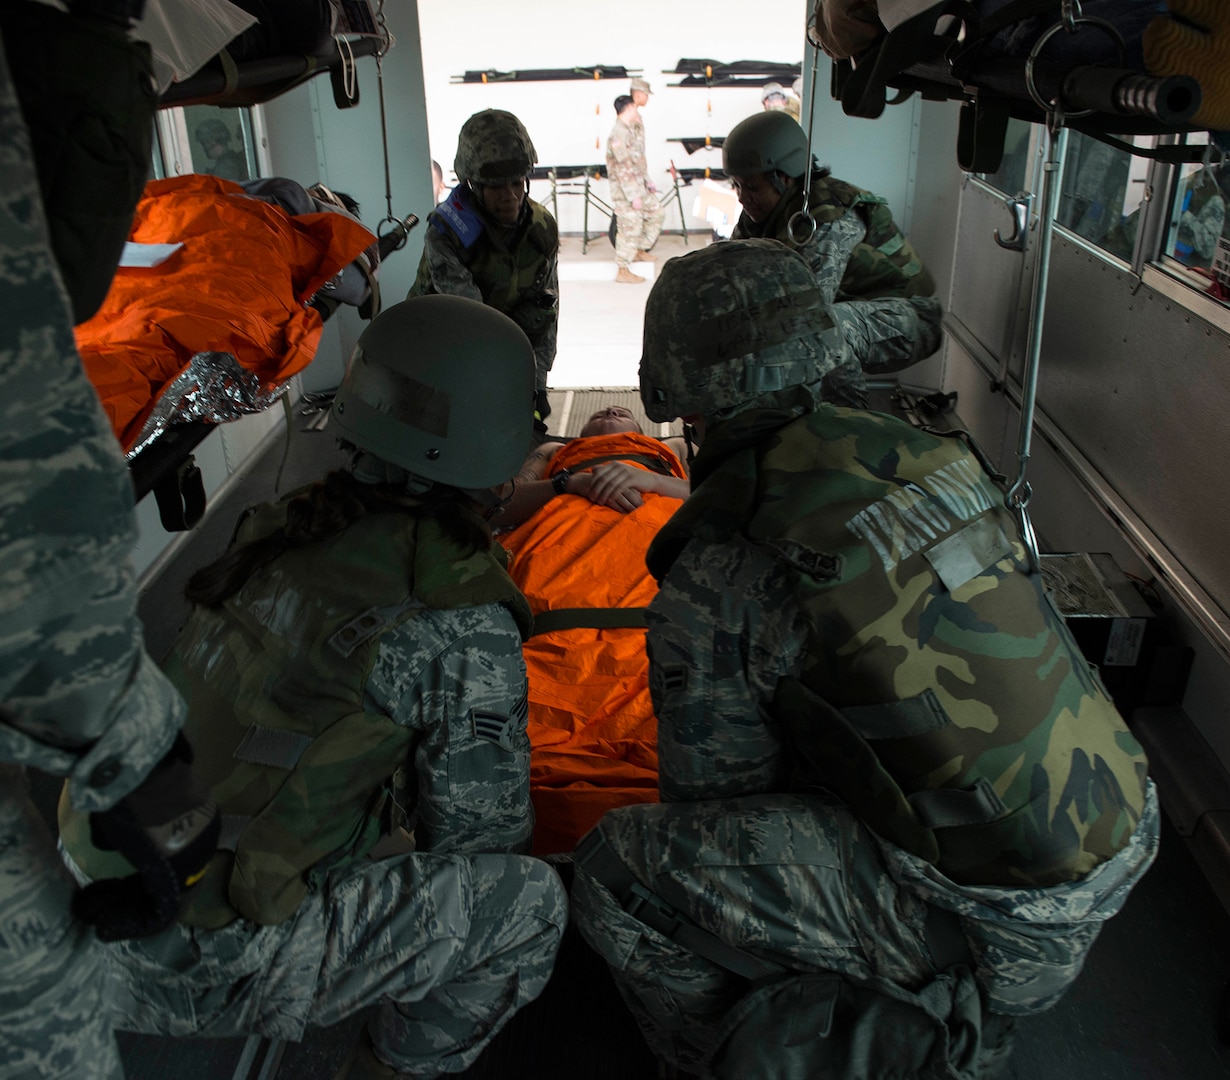 Dealing out care from land, sea and air

By Staff Sgt. Matthew B. Fredericks, 18th Wing Public Affairs / Published January 31, 2018